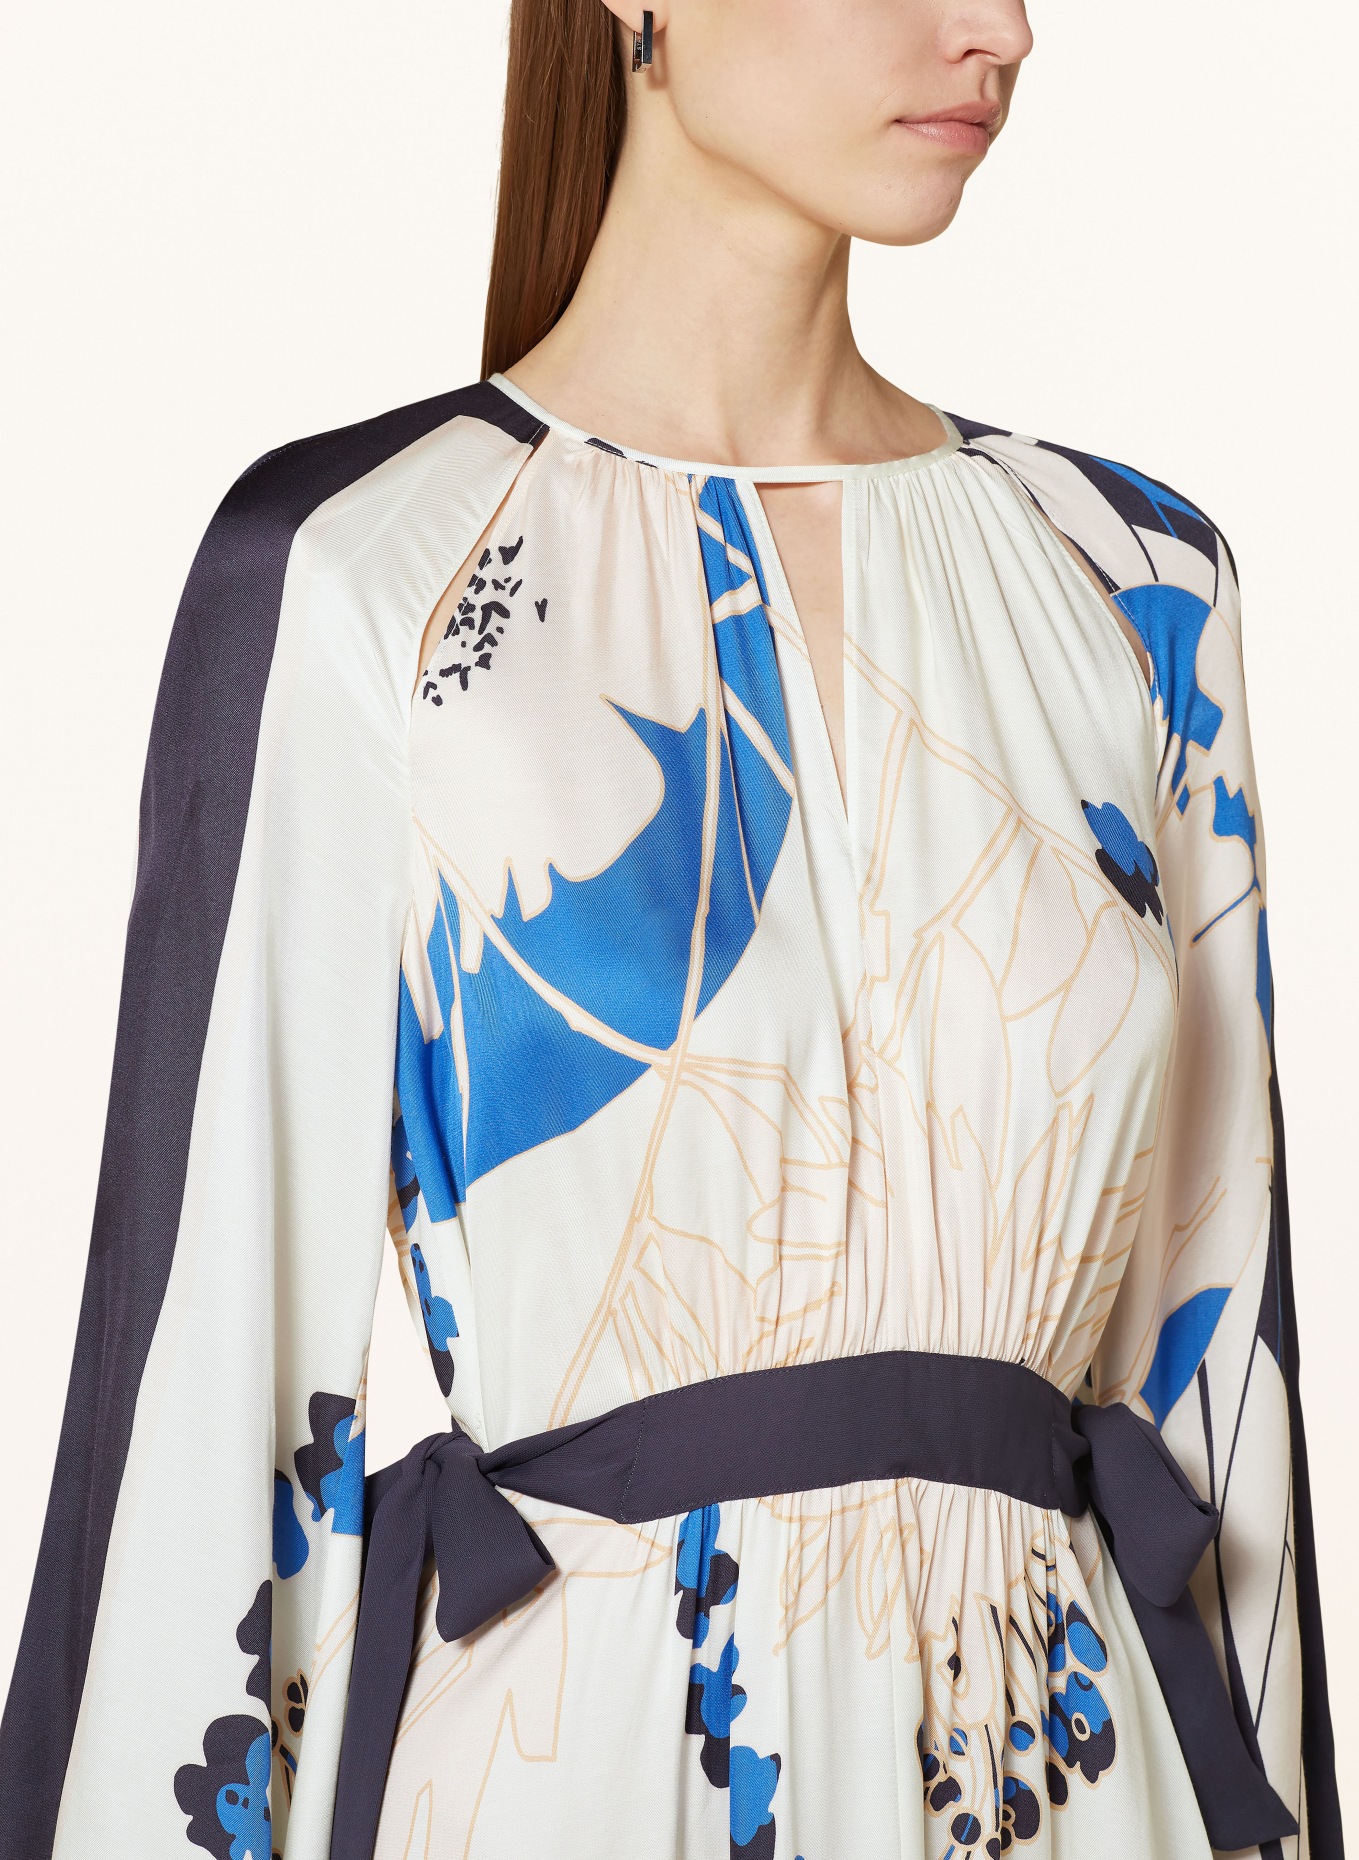 REISS Dress SASHA in mixed materials with cut-outs, Color: CREAM/ DARK BLUE/ BLUE (Image 4)